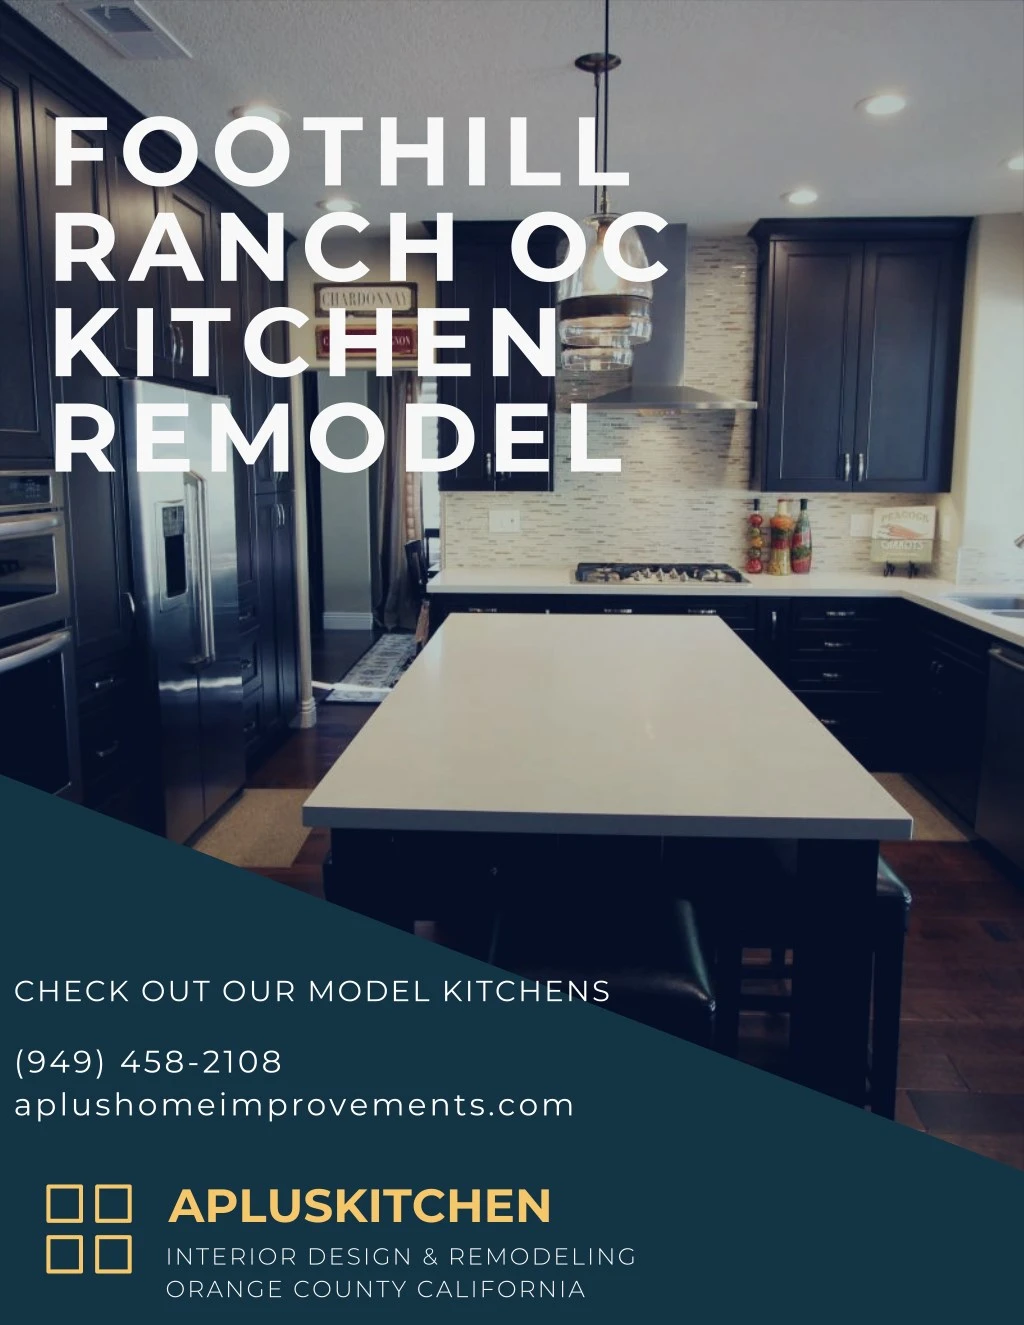 foothill ranch oc kitchen remodel n.